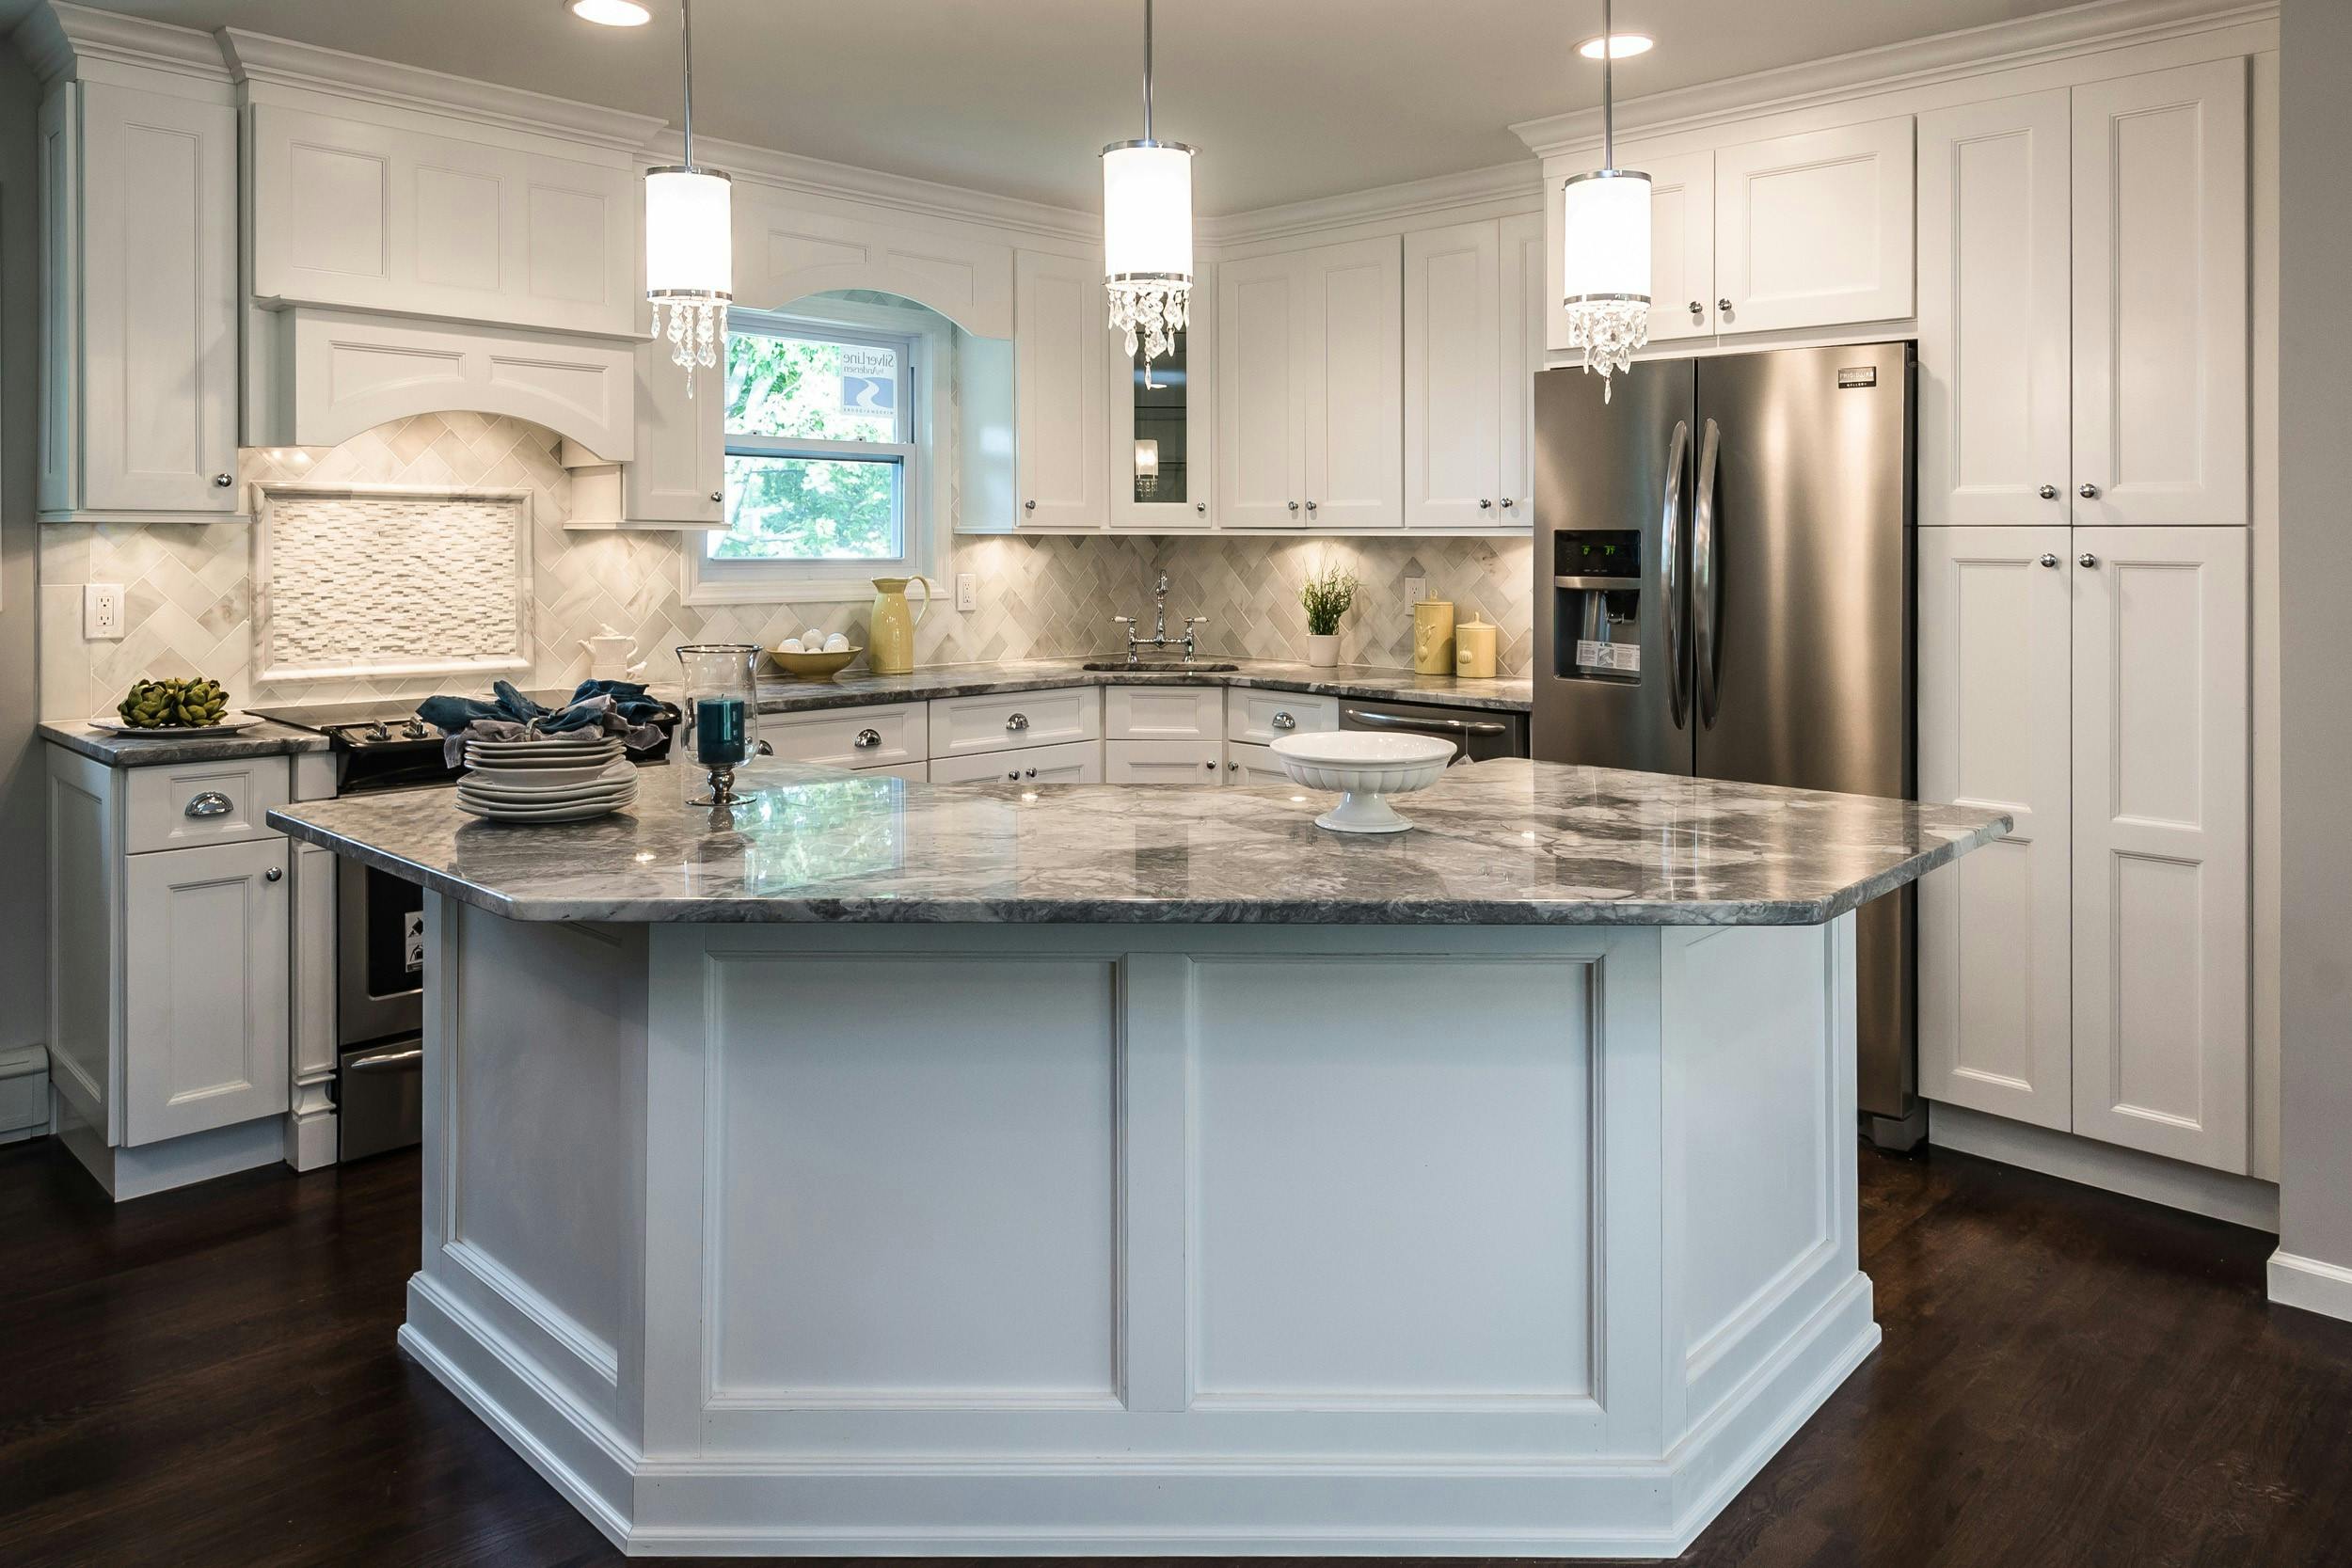 Pair Kitchen Countertops And Cabinets, What Color Cabinets Go With Dark Countertops